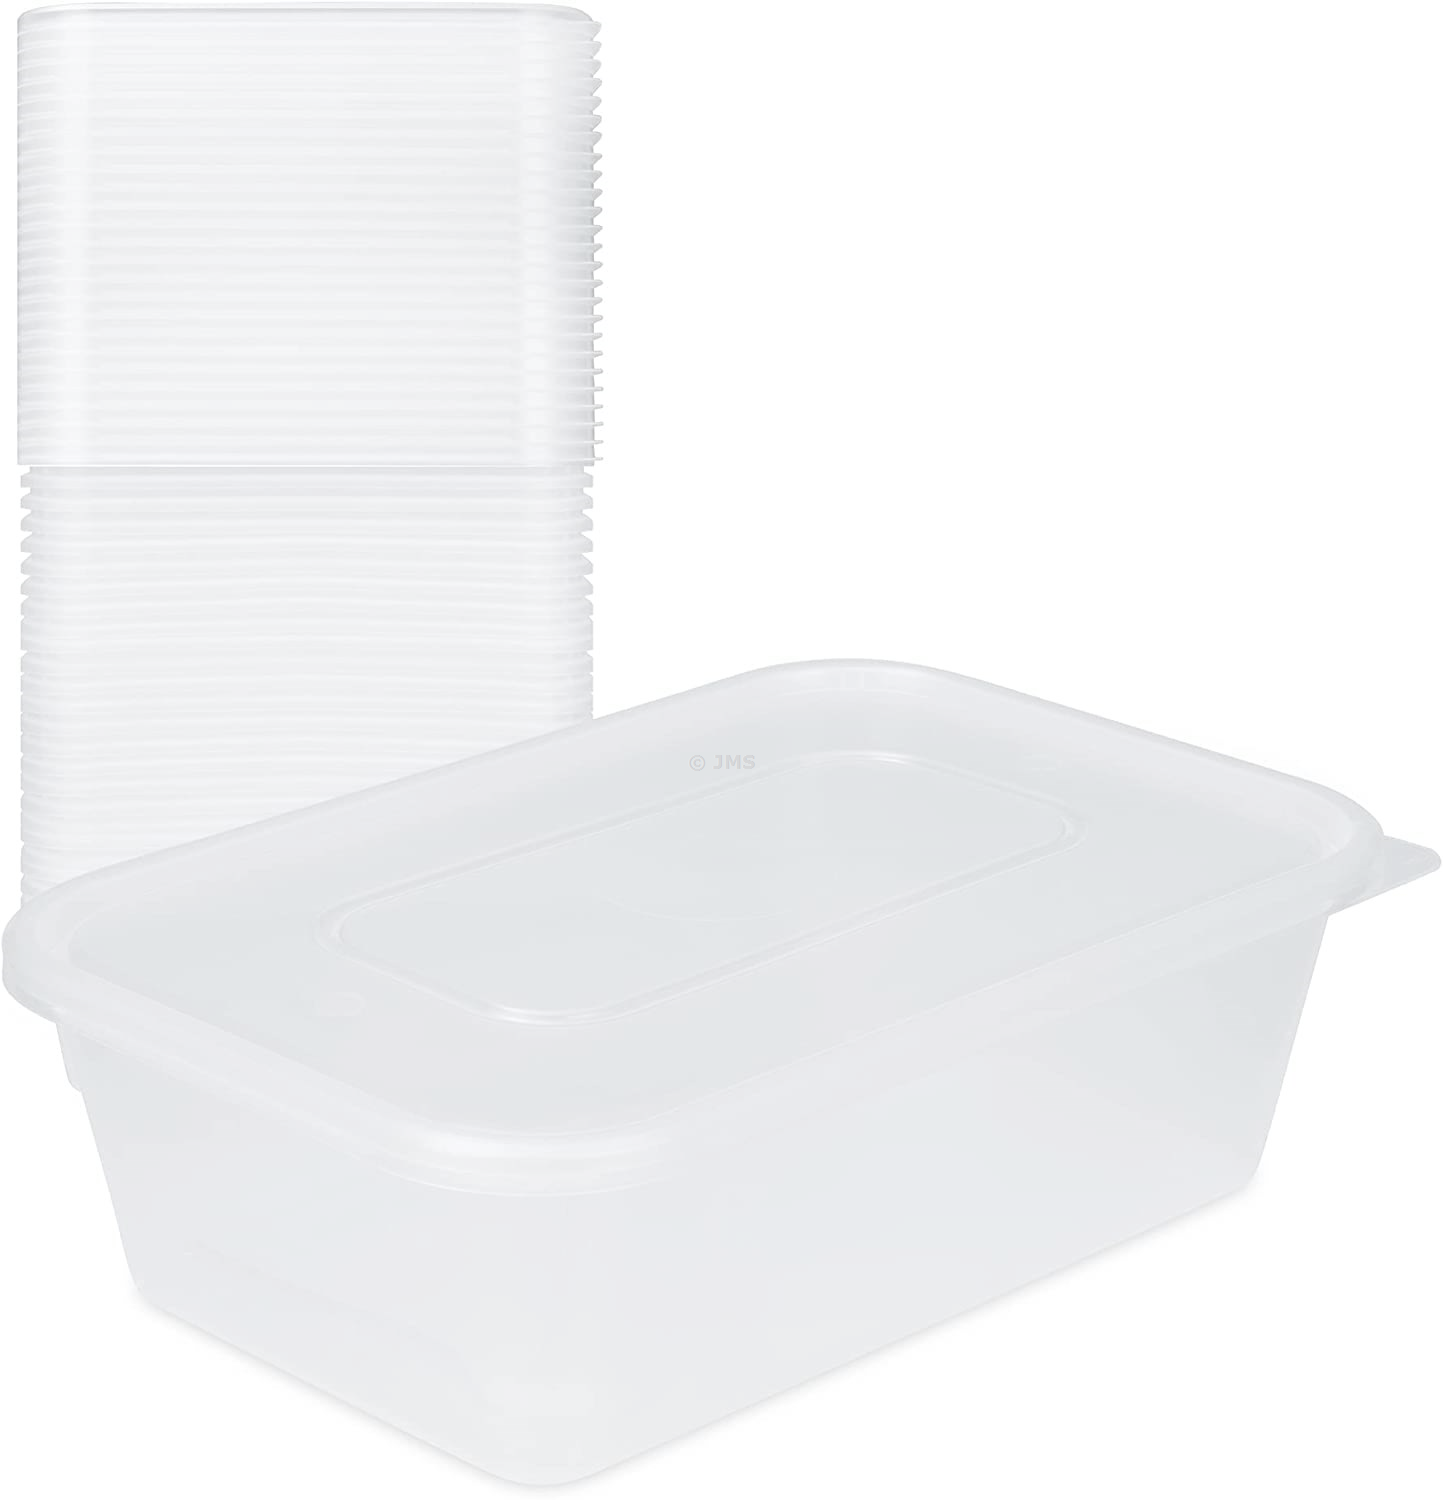 Plastic Food Containers with Lids - Takeaway - Microwave - Freezer Safe -  Boxes